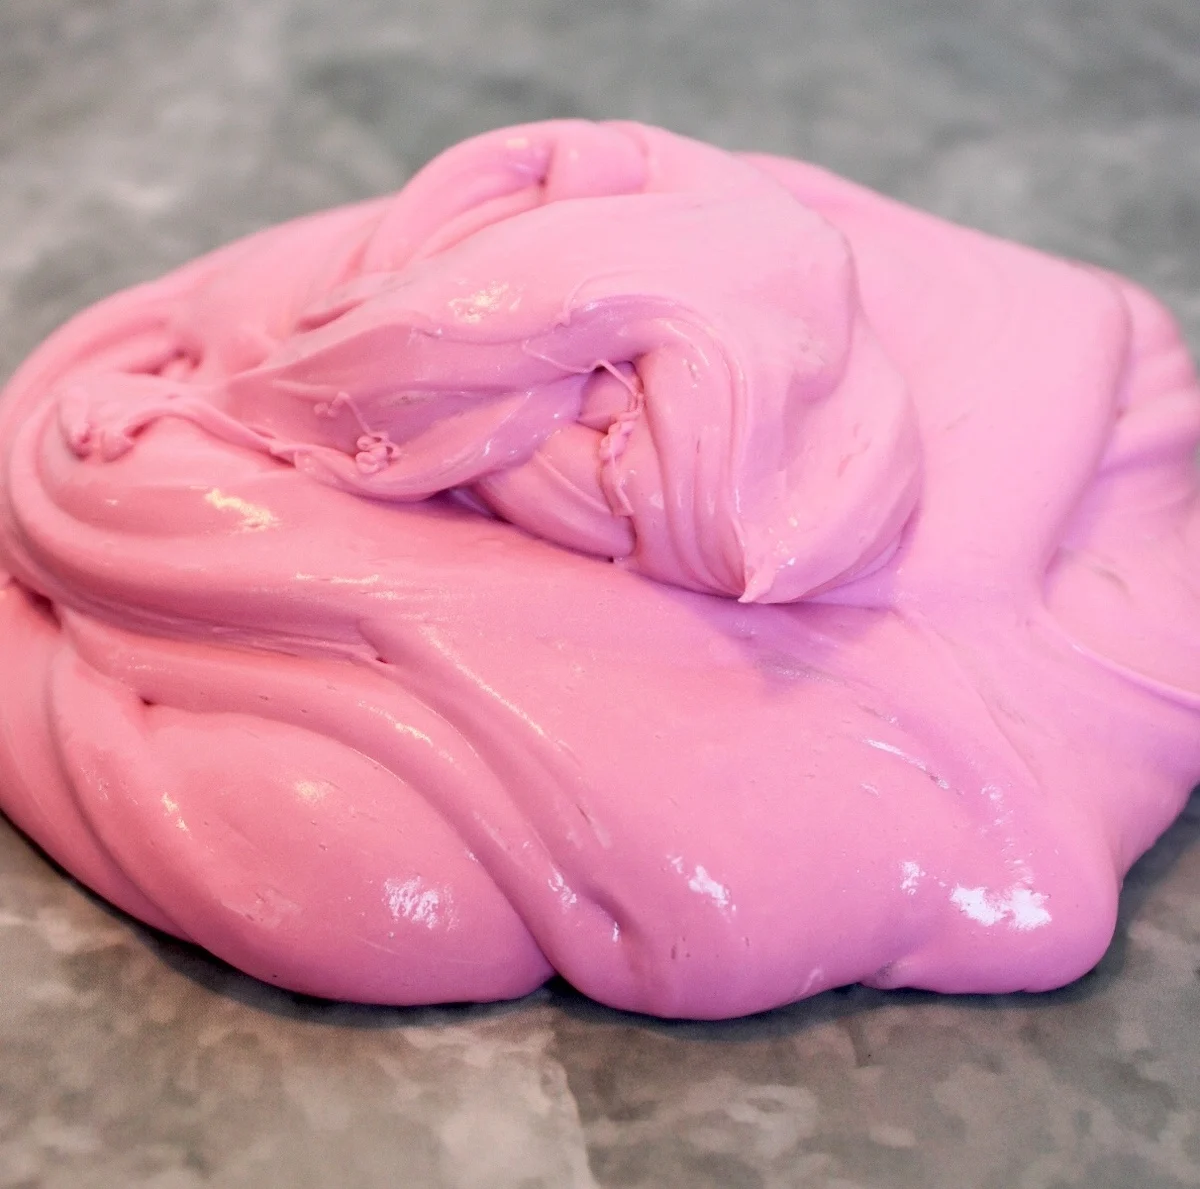 butter clay slime